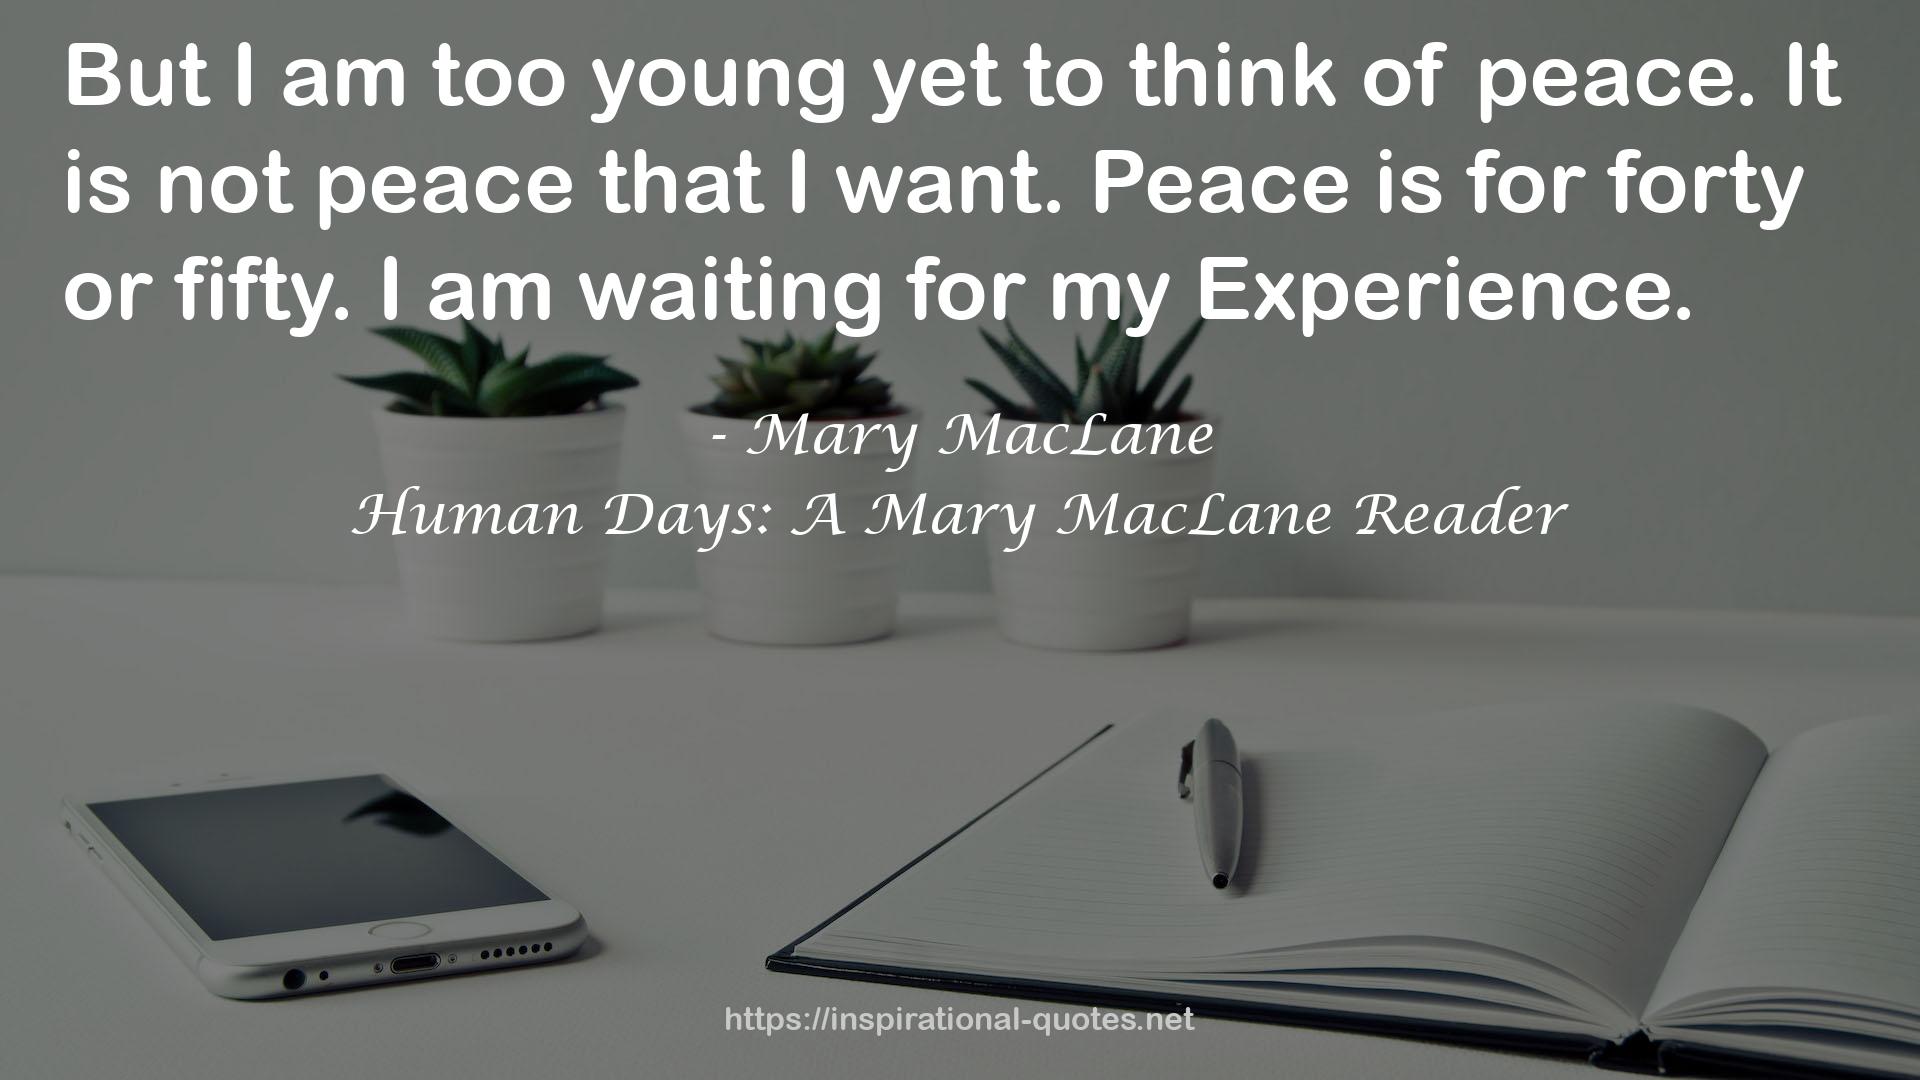 Human Days: A Mary MacLane Reader QUOTES